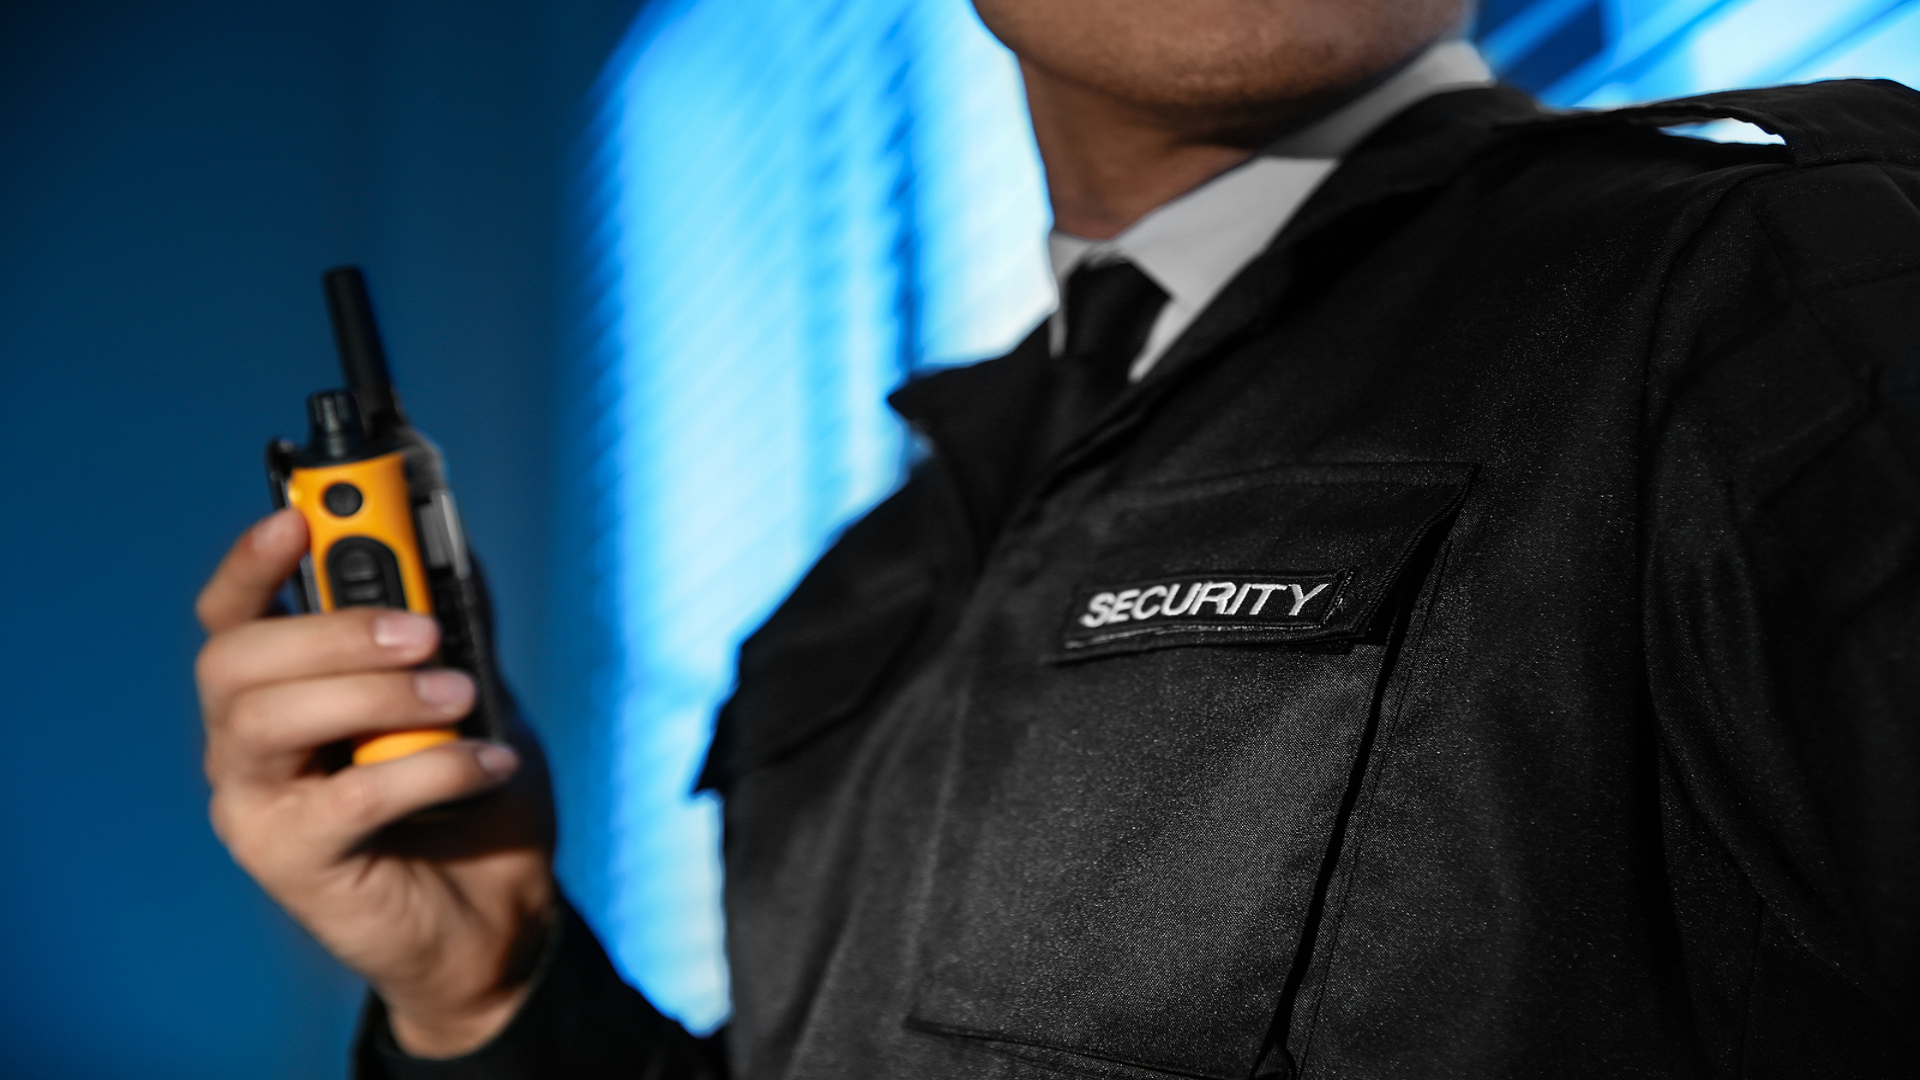 What Are Security Guard Services and How Can They Help Your Business?